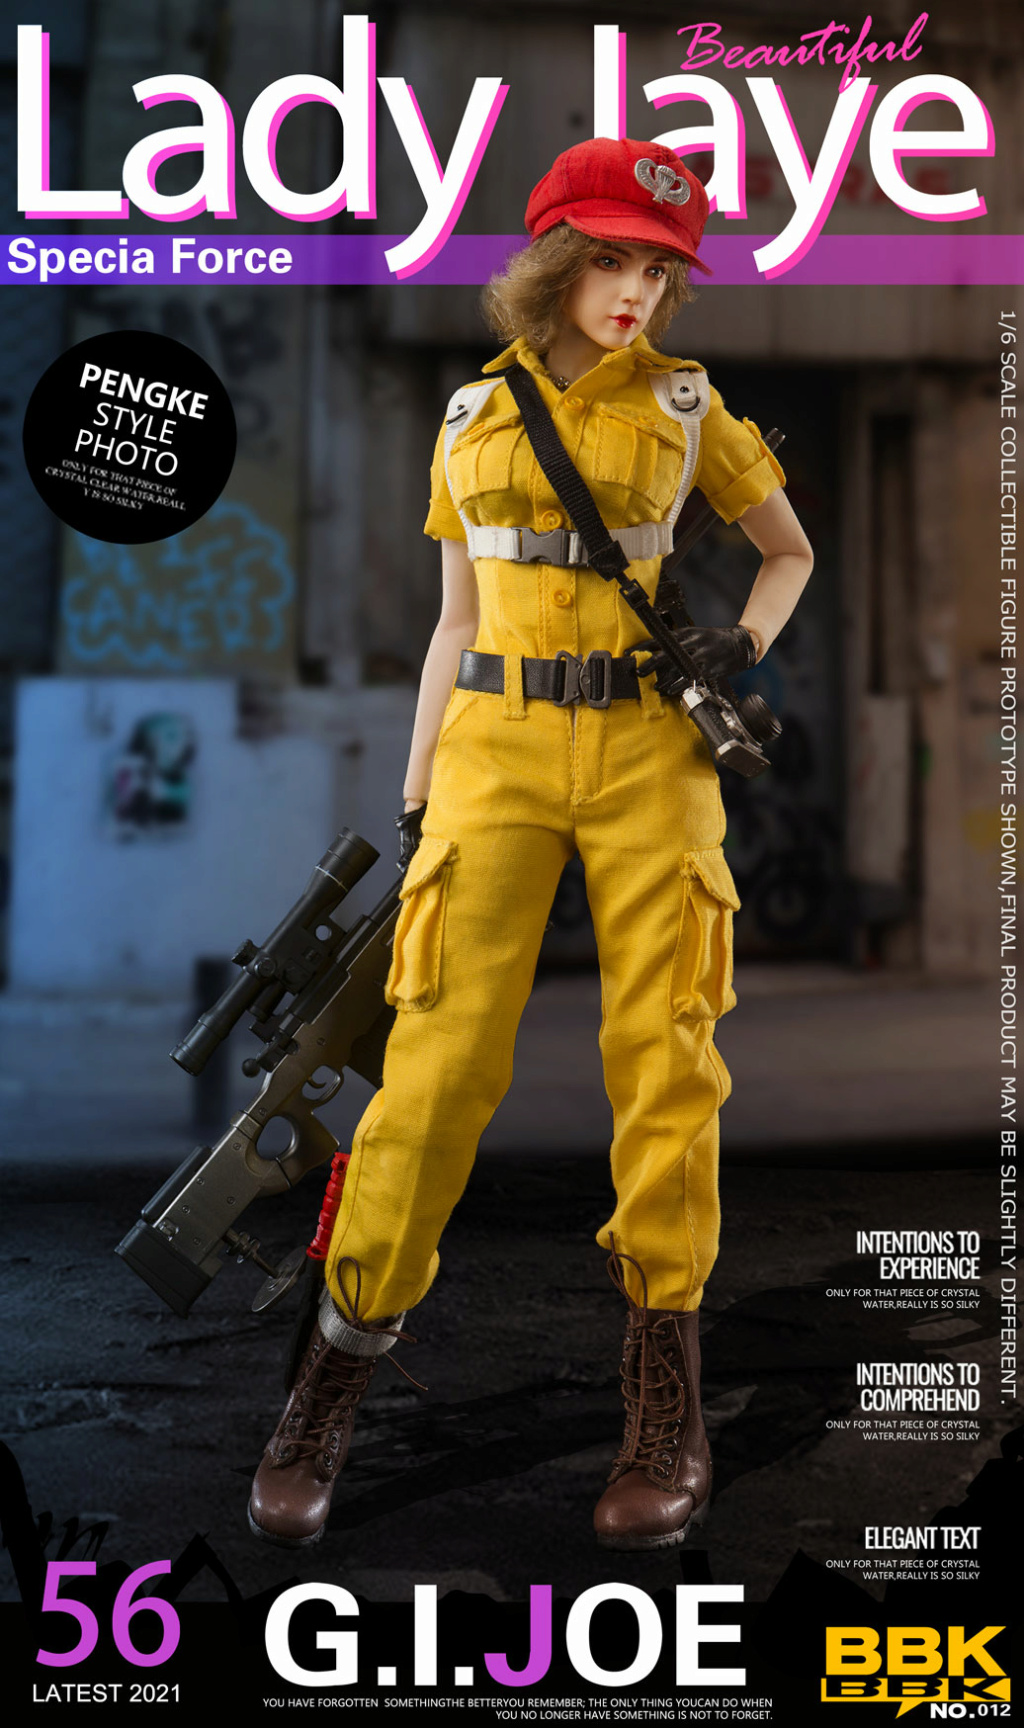 GIJoeJay - NEW PRODUCT: BBK: 1/6 GIJOE Jay Female Soldier Action Figure# 14575811